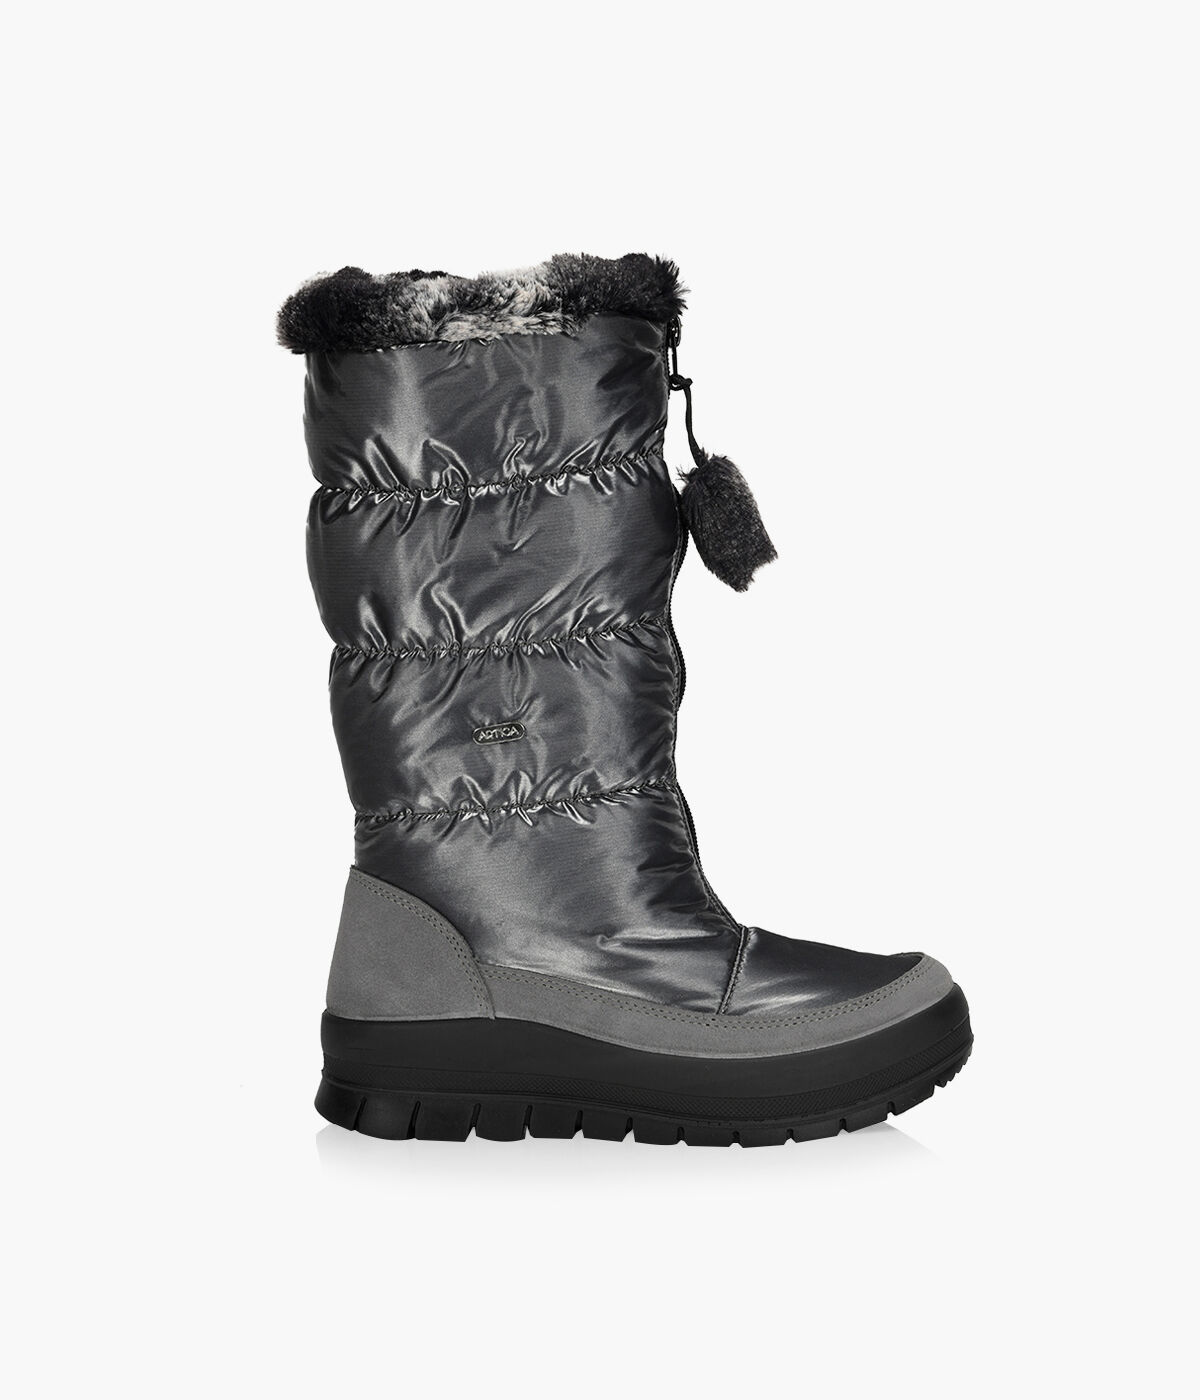 browns artica boots review